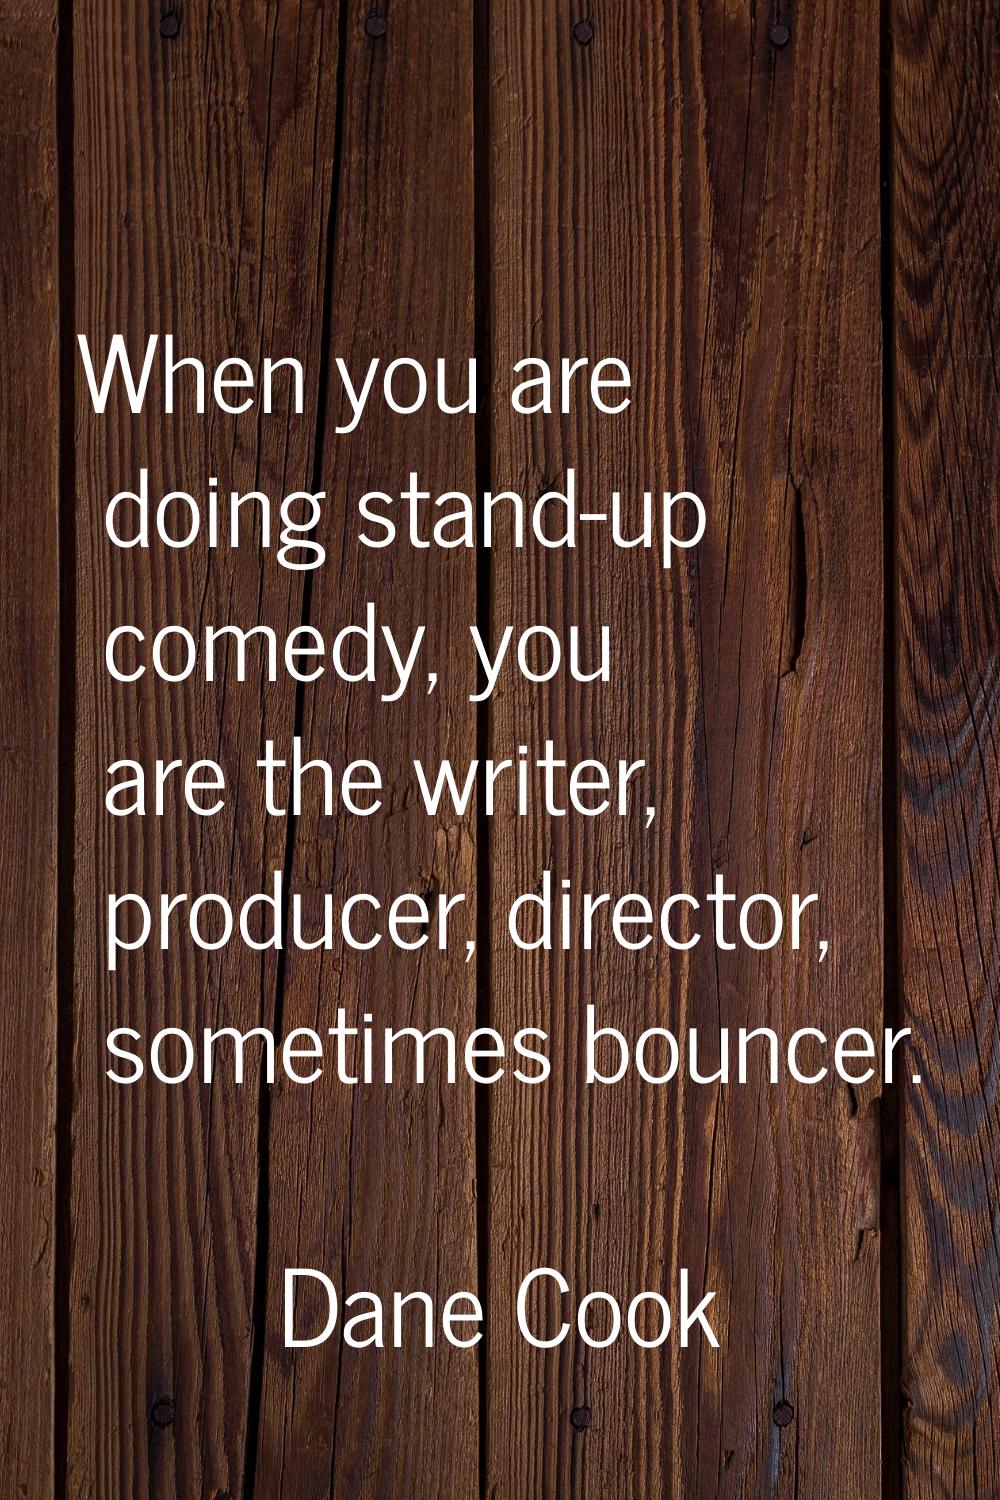 When you are doing stand-up comedy, you are the writer, producer, director, sometimes bouncer.